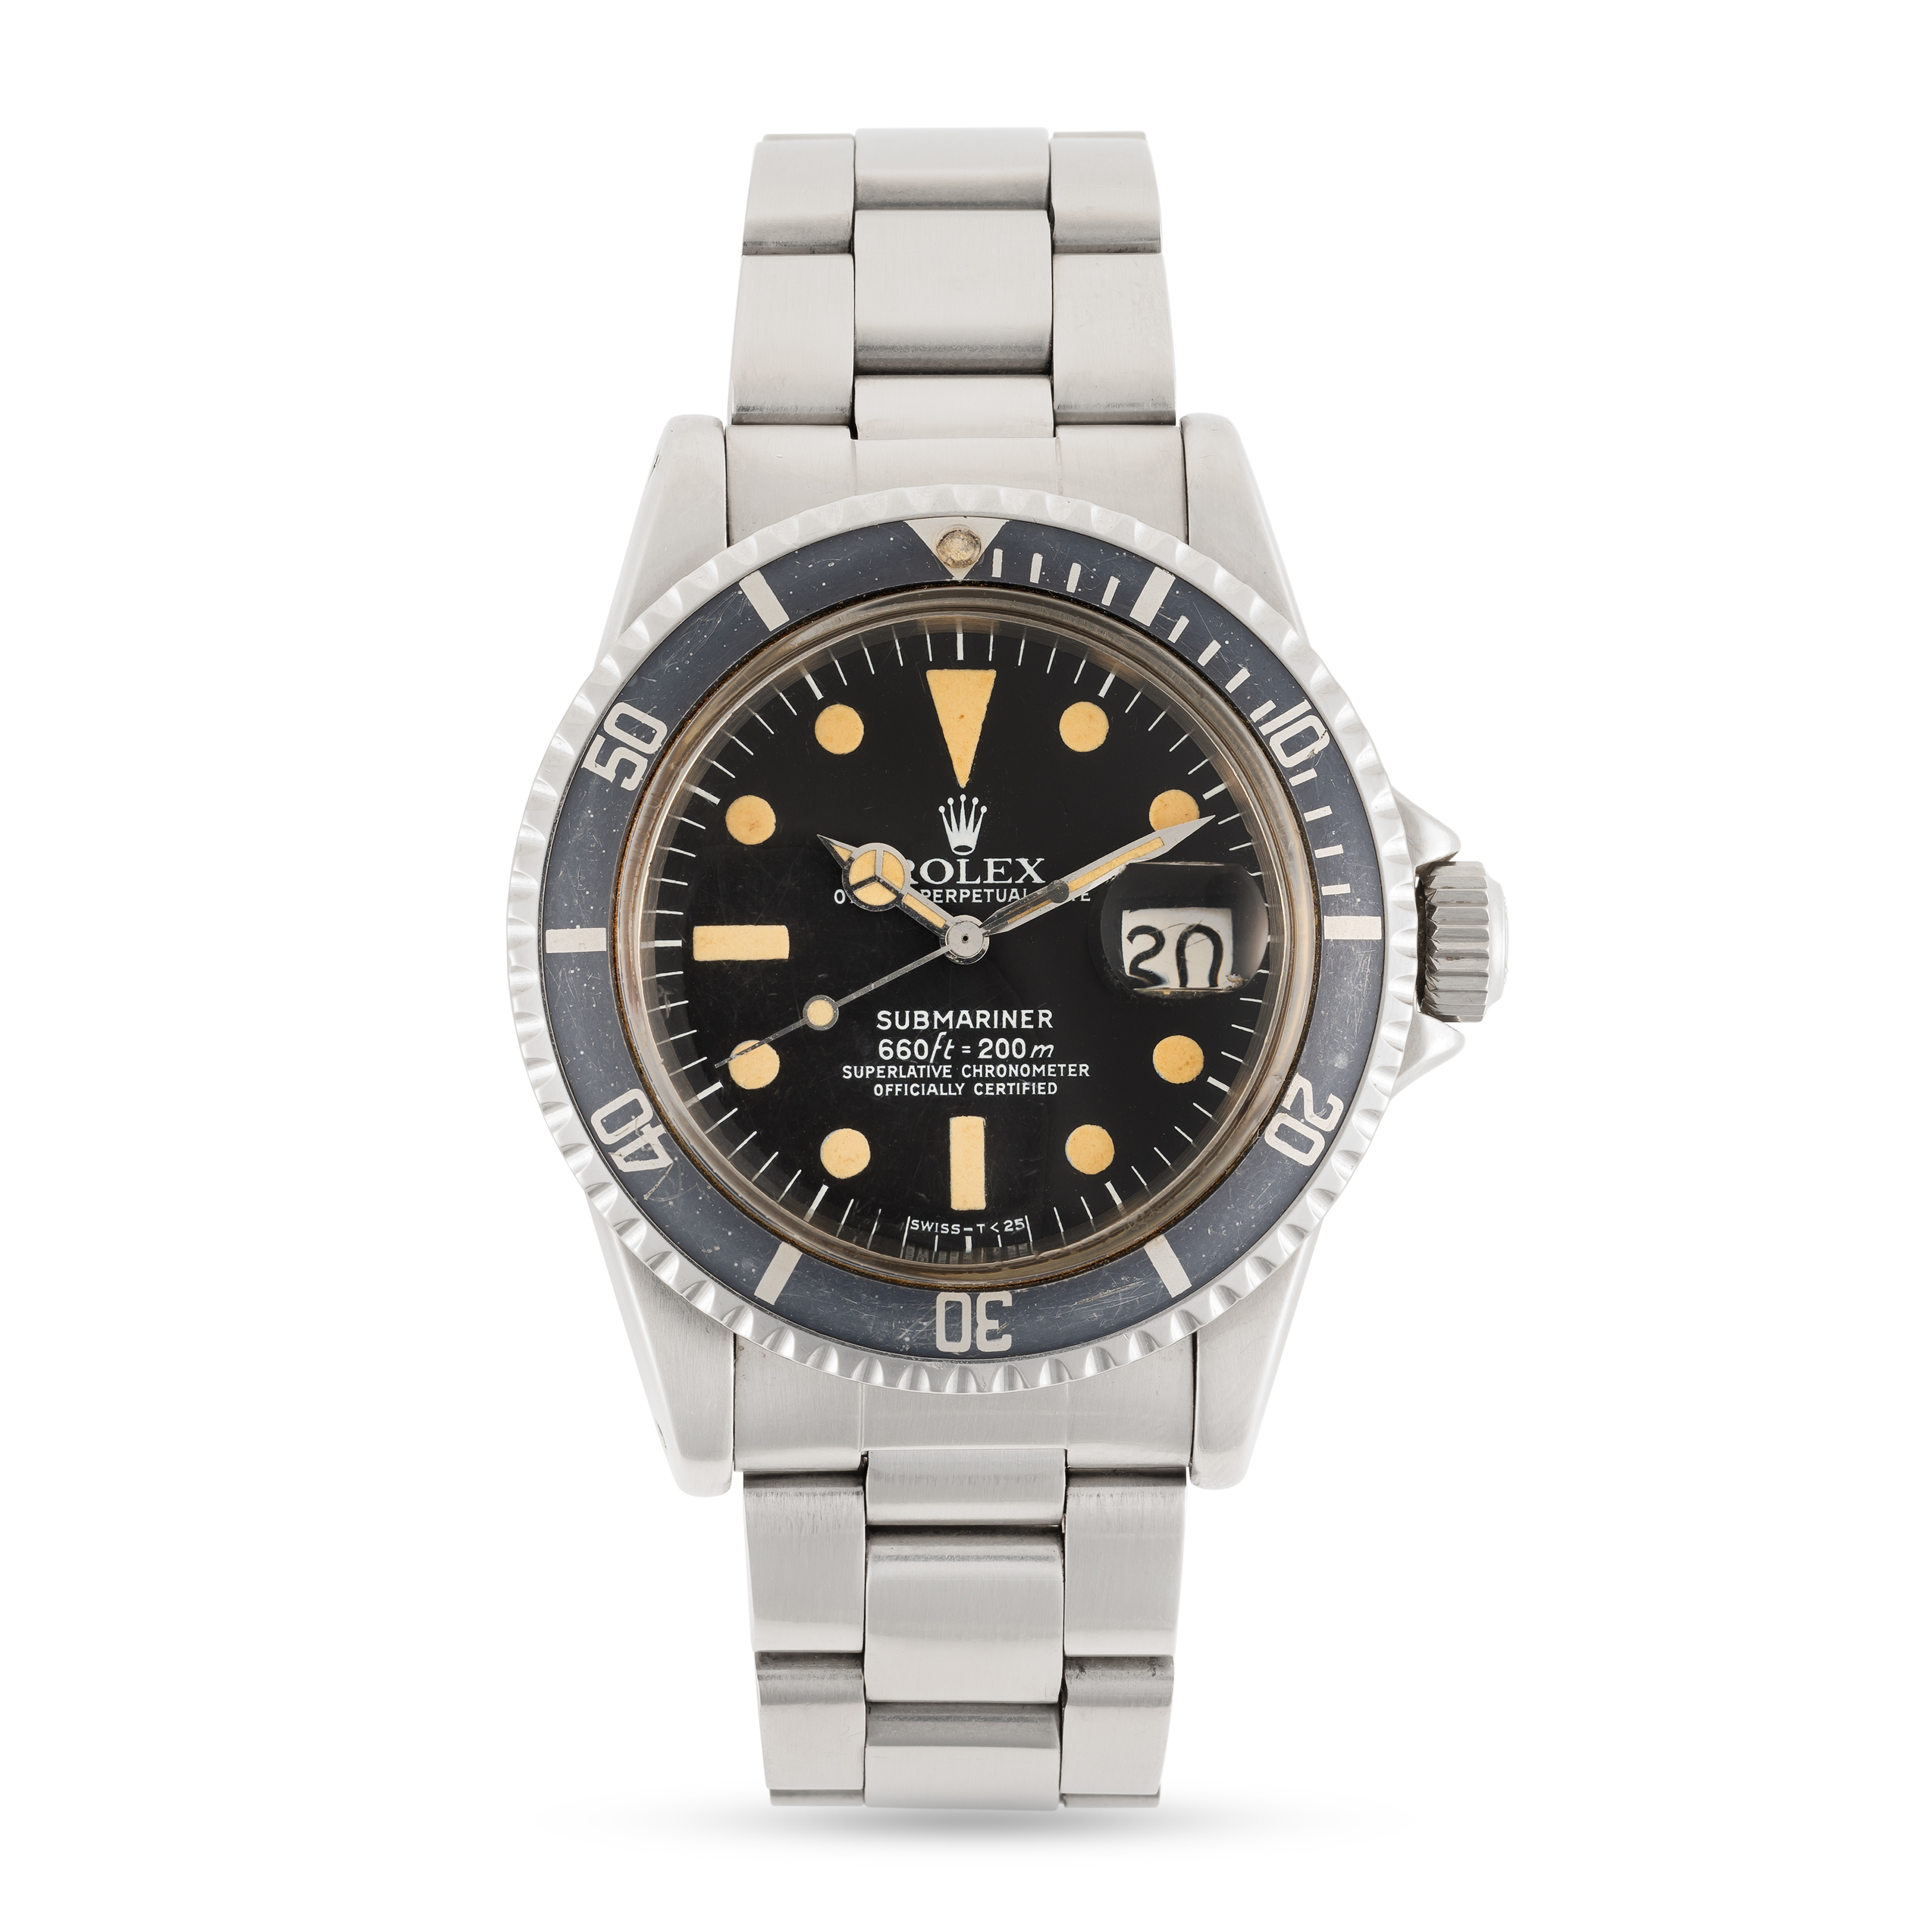 A GENTLEMAN'S SIZE STAINLESS STEEL ROLEX OYSTER PERPETUAL DATE SUBMARINER BRACELET WATCH CIRCA 1979, - Image 2 of 10